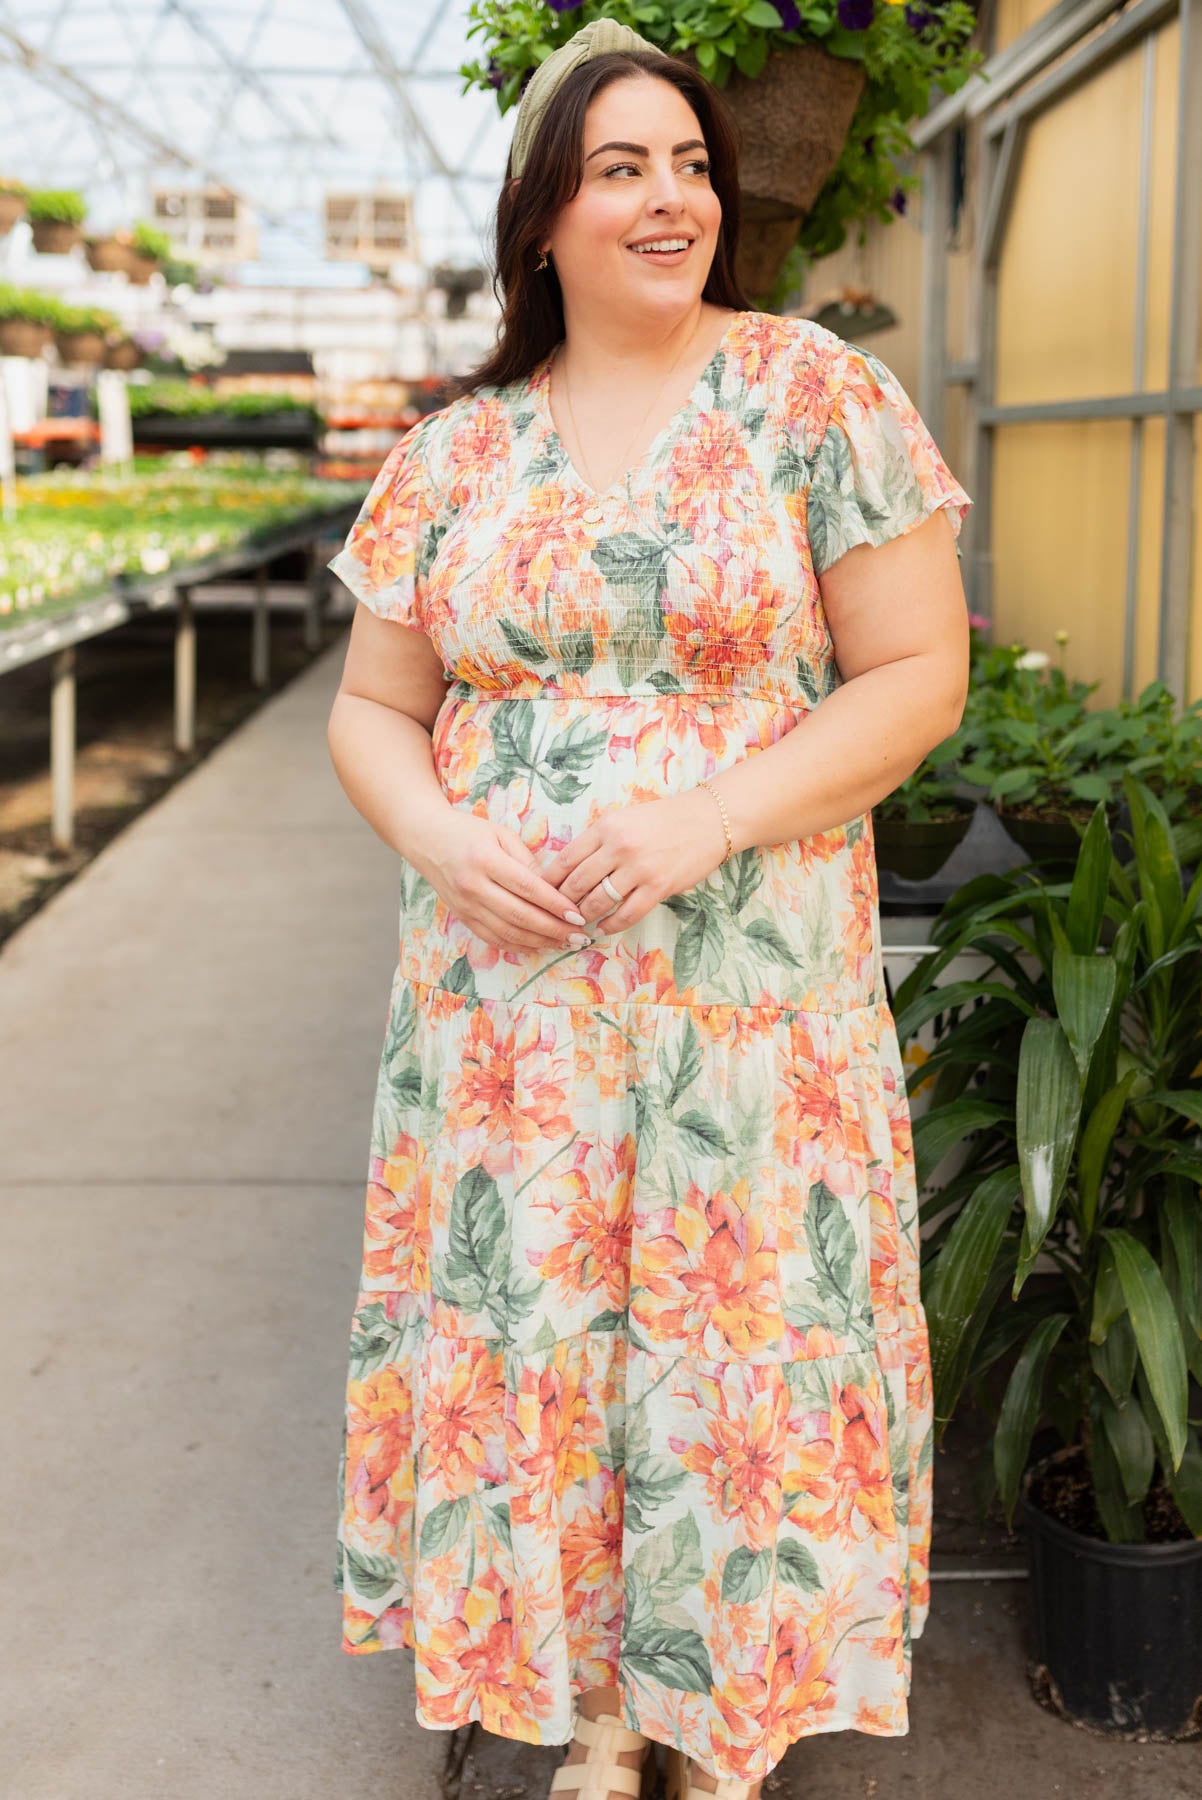 Short sleeve mint floral dress with a smocked bodice in plus size